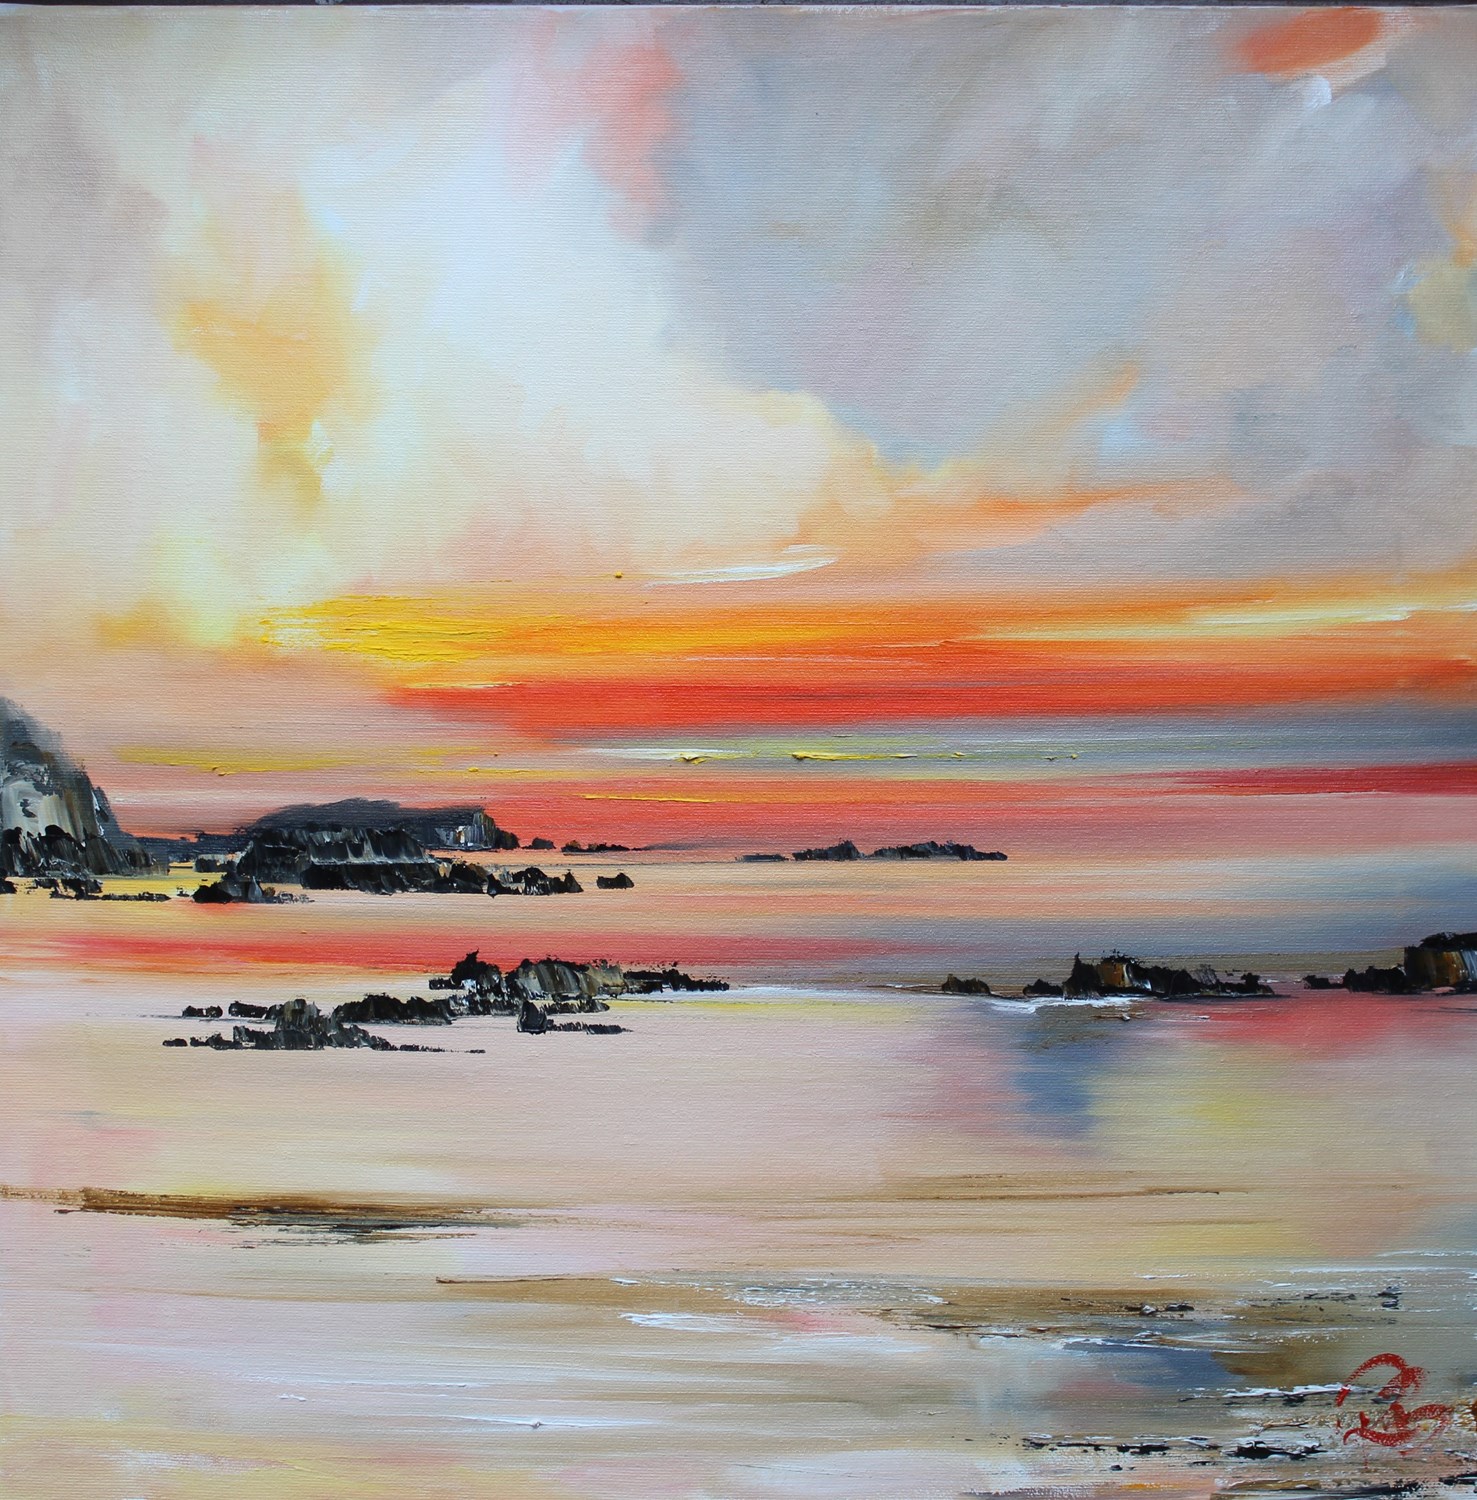 'Clouds lit by sunset' by artist Rosanne Barr